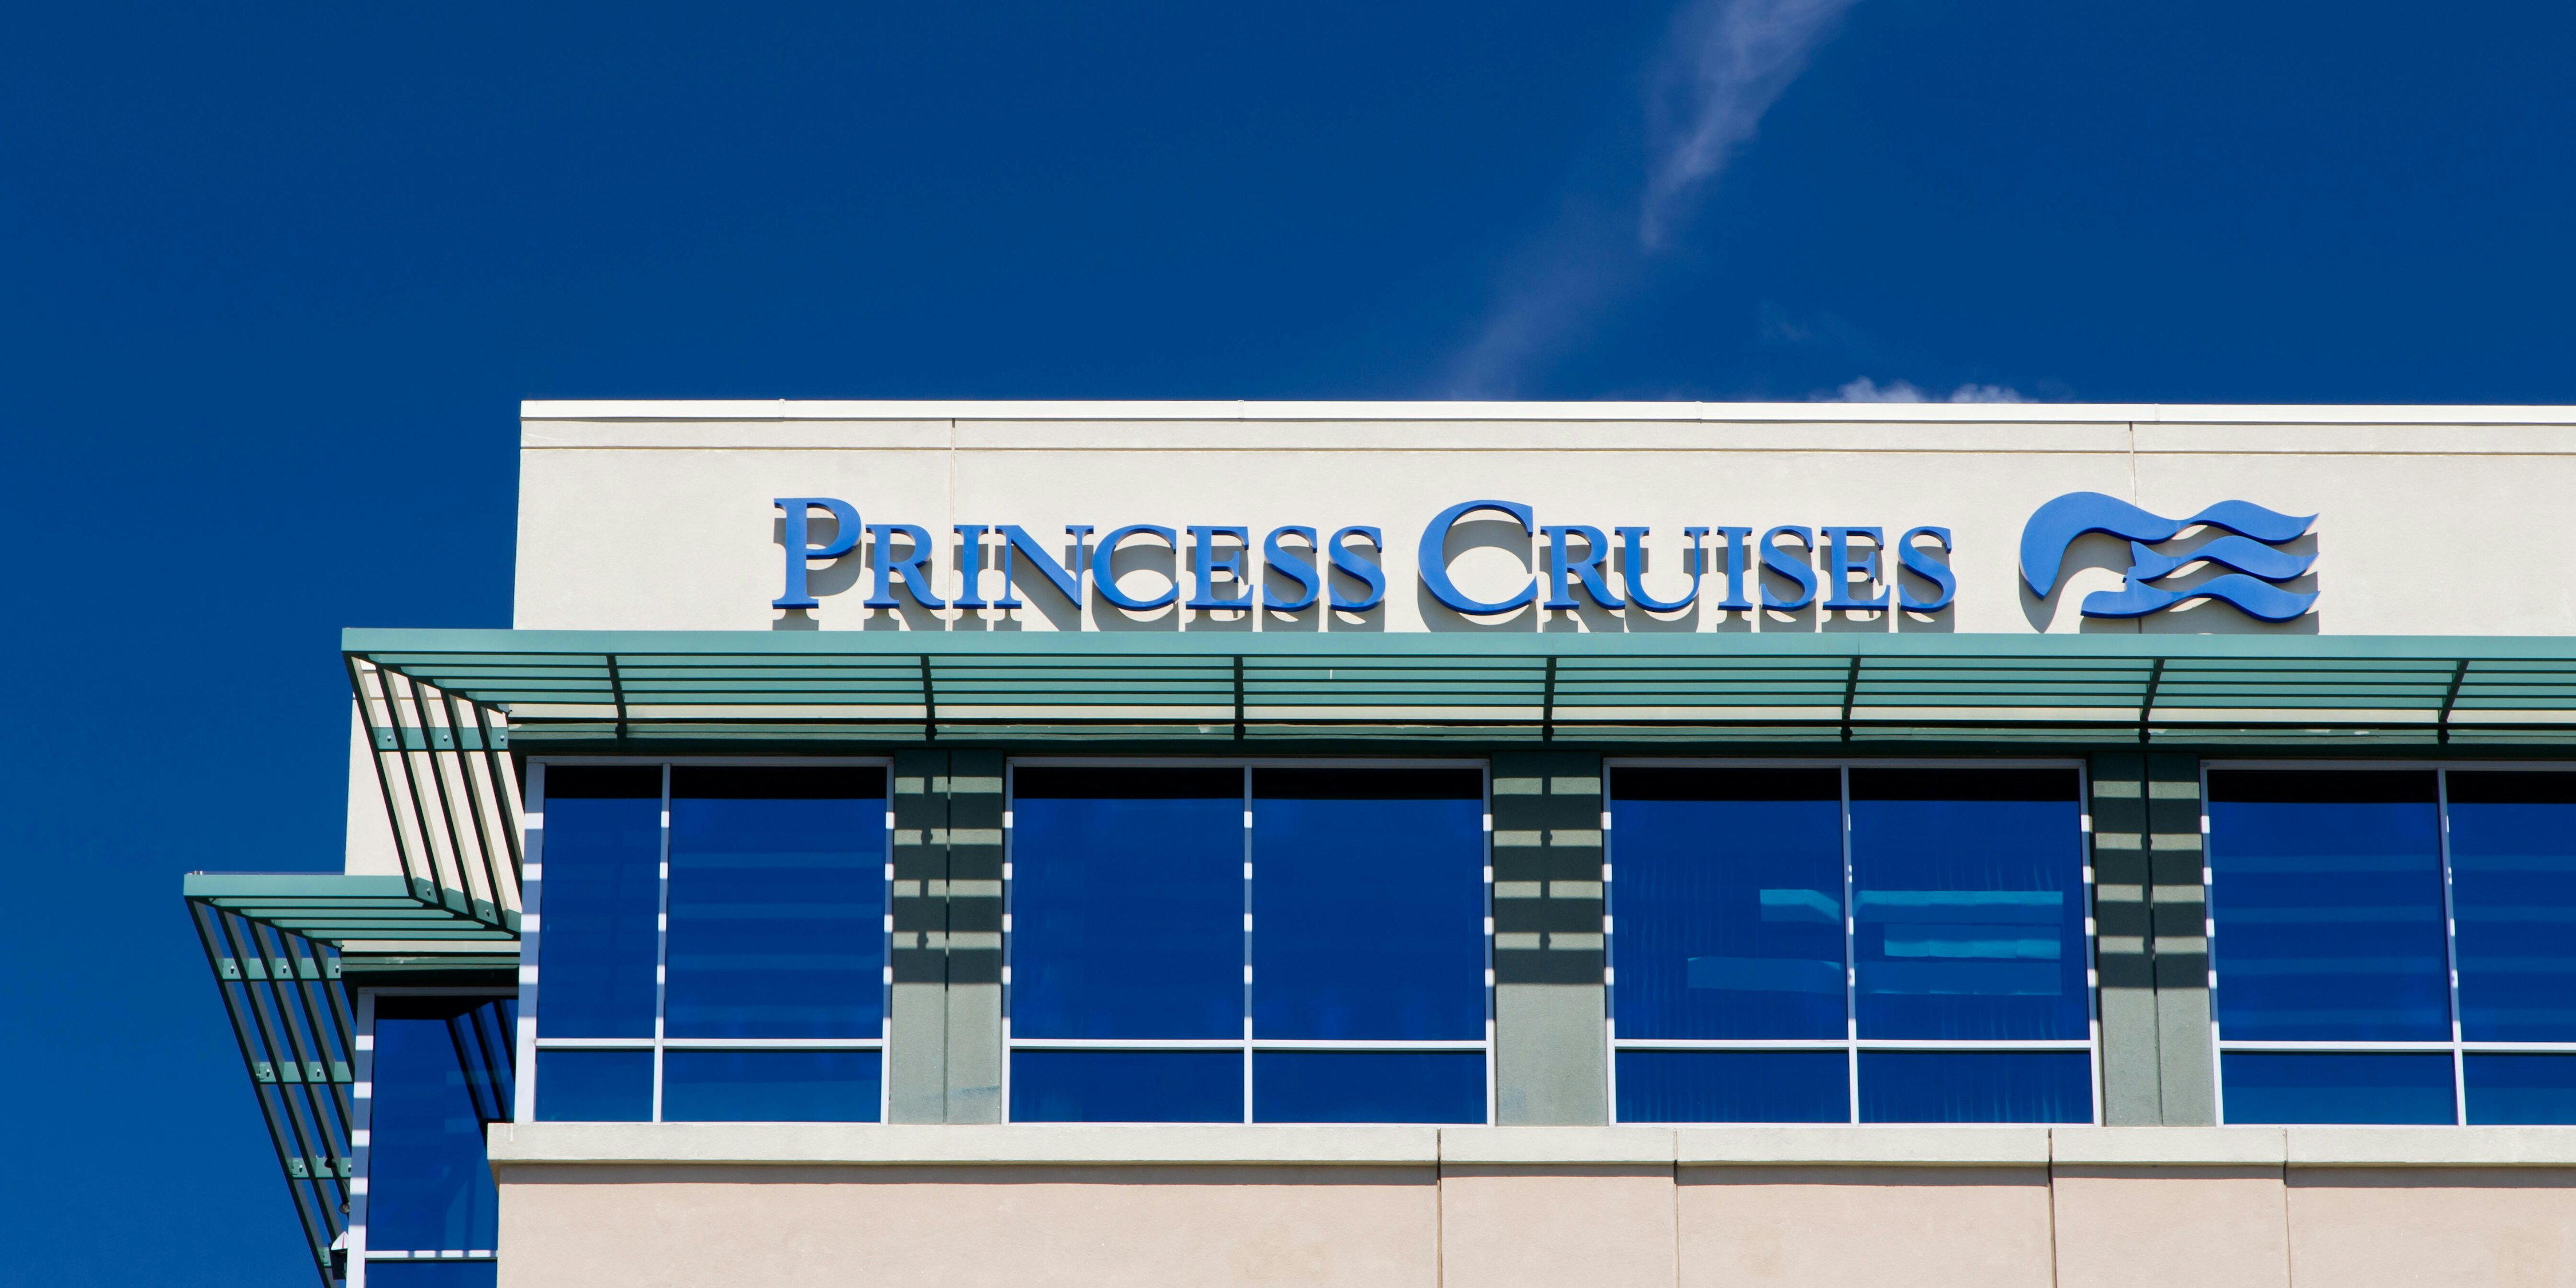 princess cruise lines office location